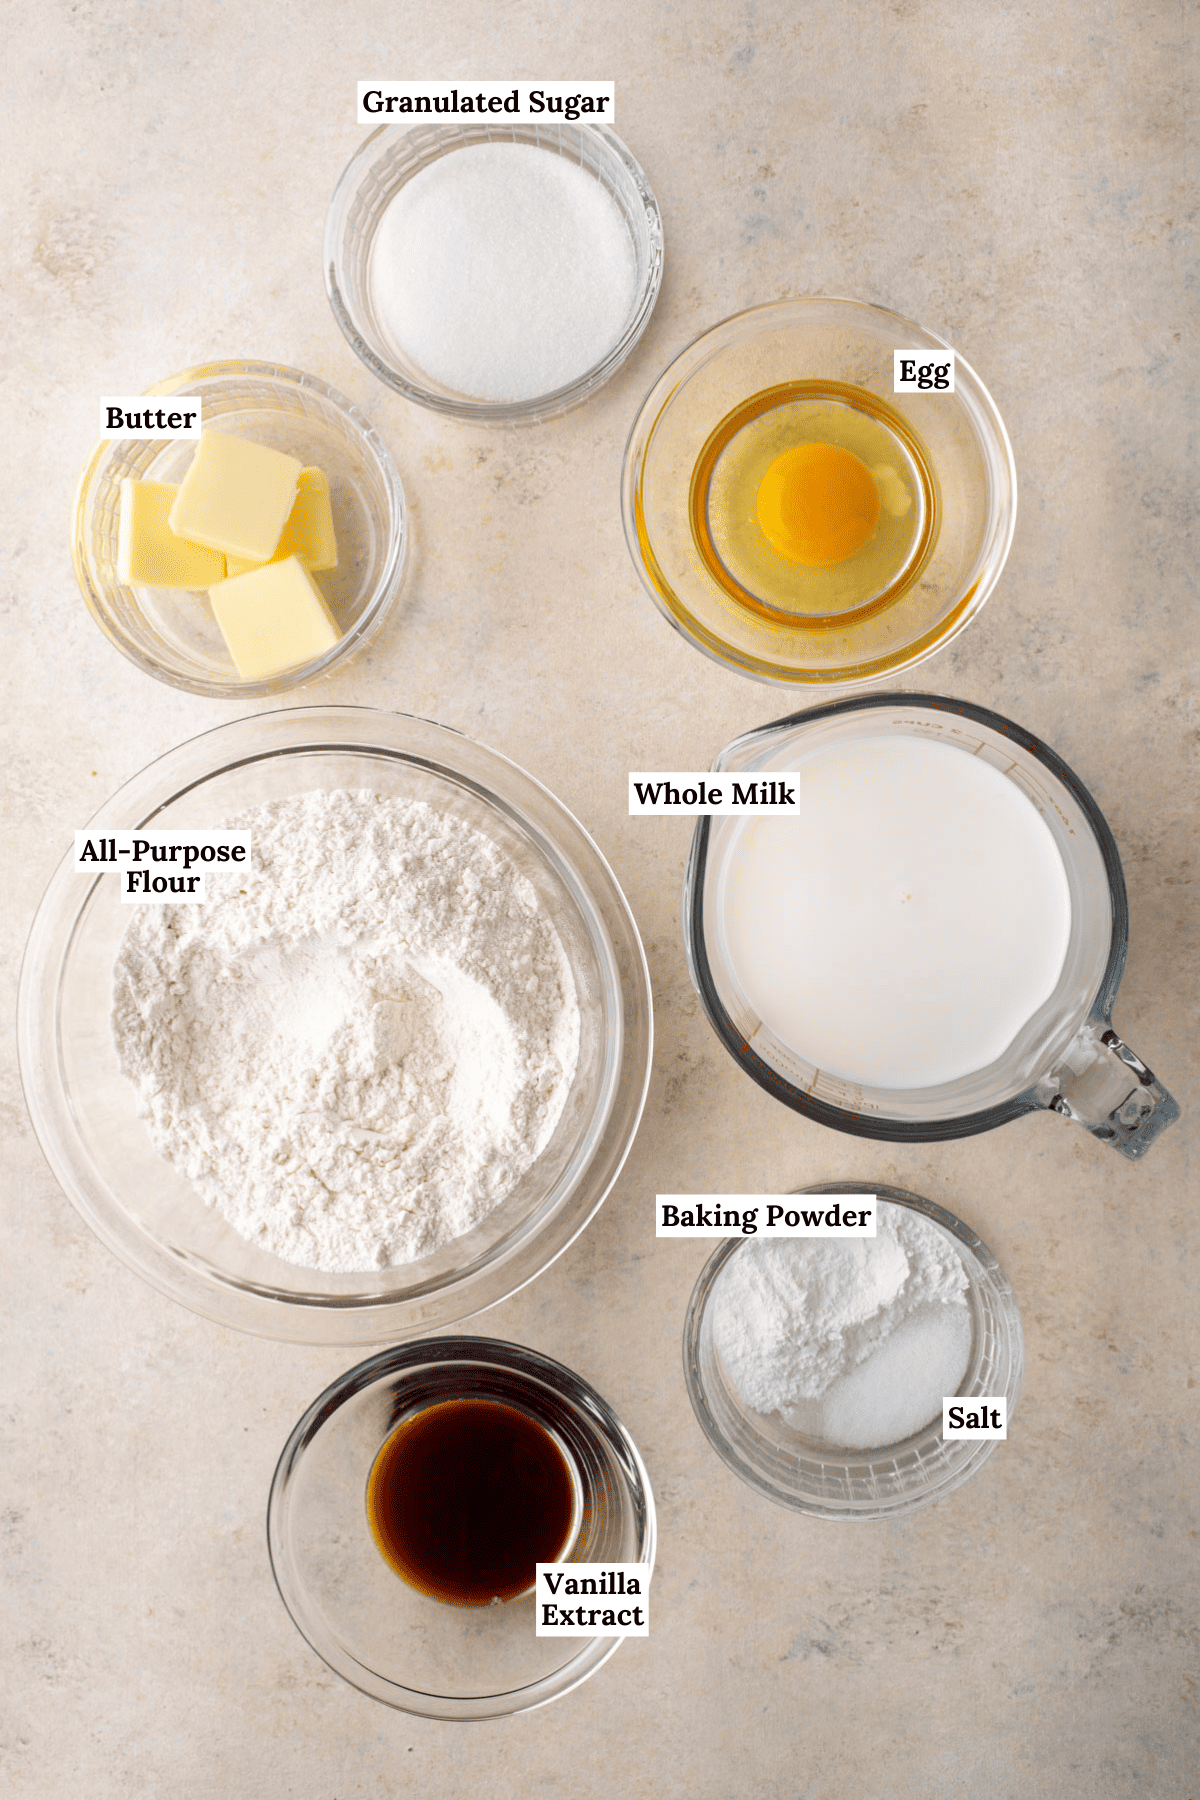 ingredients for pancakes including all-purpose flour, granulated sugar, baking powder, salt, milk, egg, unsalted butter, and vanilla extract